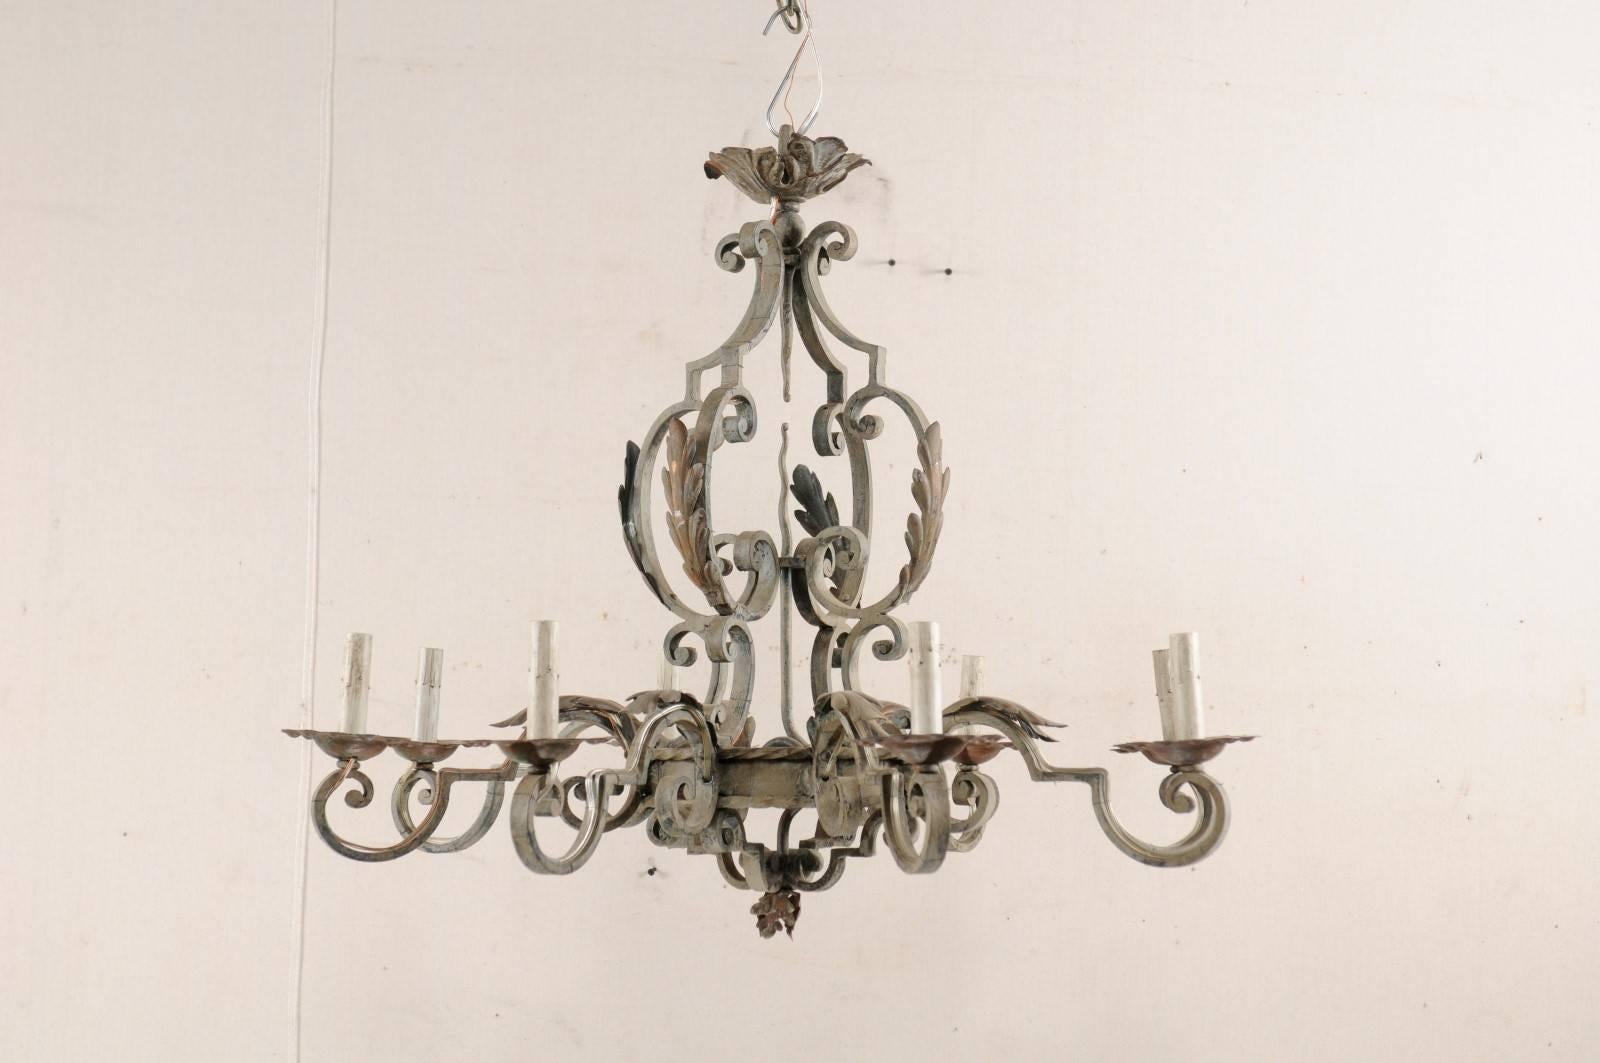 A French painted iron eight-light chandelier from the mid-20th century. This vintage French iron chandelier features a smaller centre ring with roped accent detail at its upper edge, surround by a decorative armature of scroll work, and adorned with